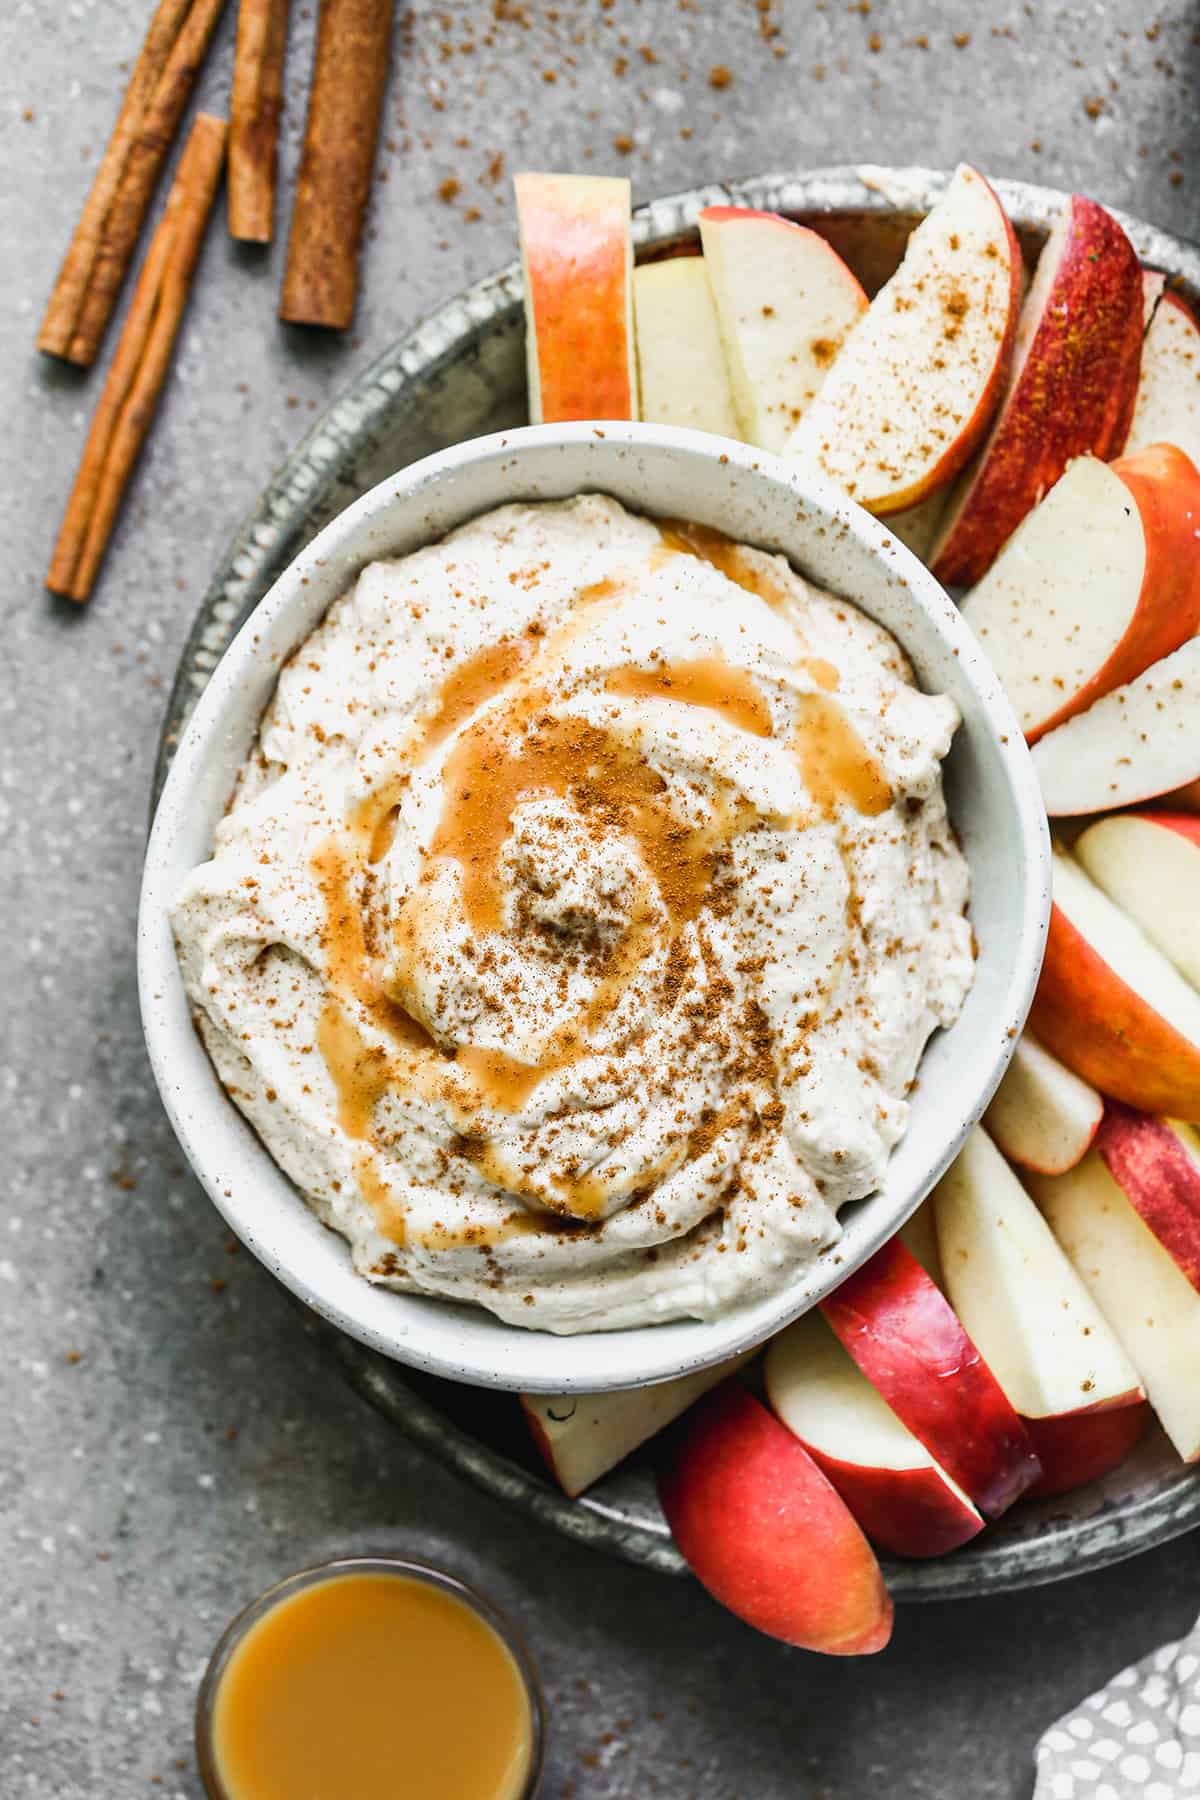 A bowl of Caramel Apple Dip, topped with caramel sauce and cinnamon, with sliced apples on the side.